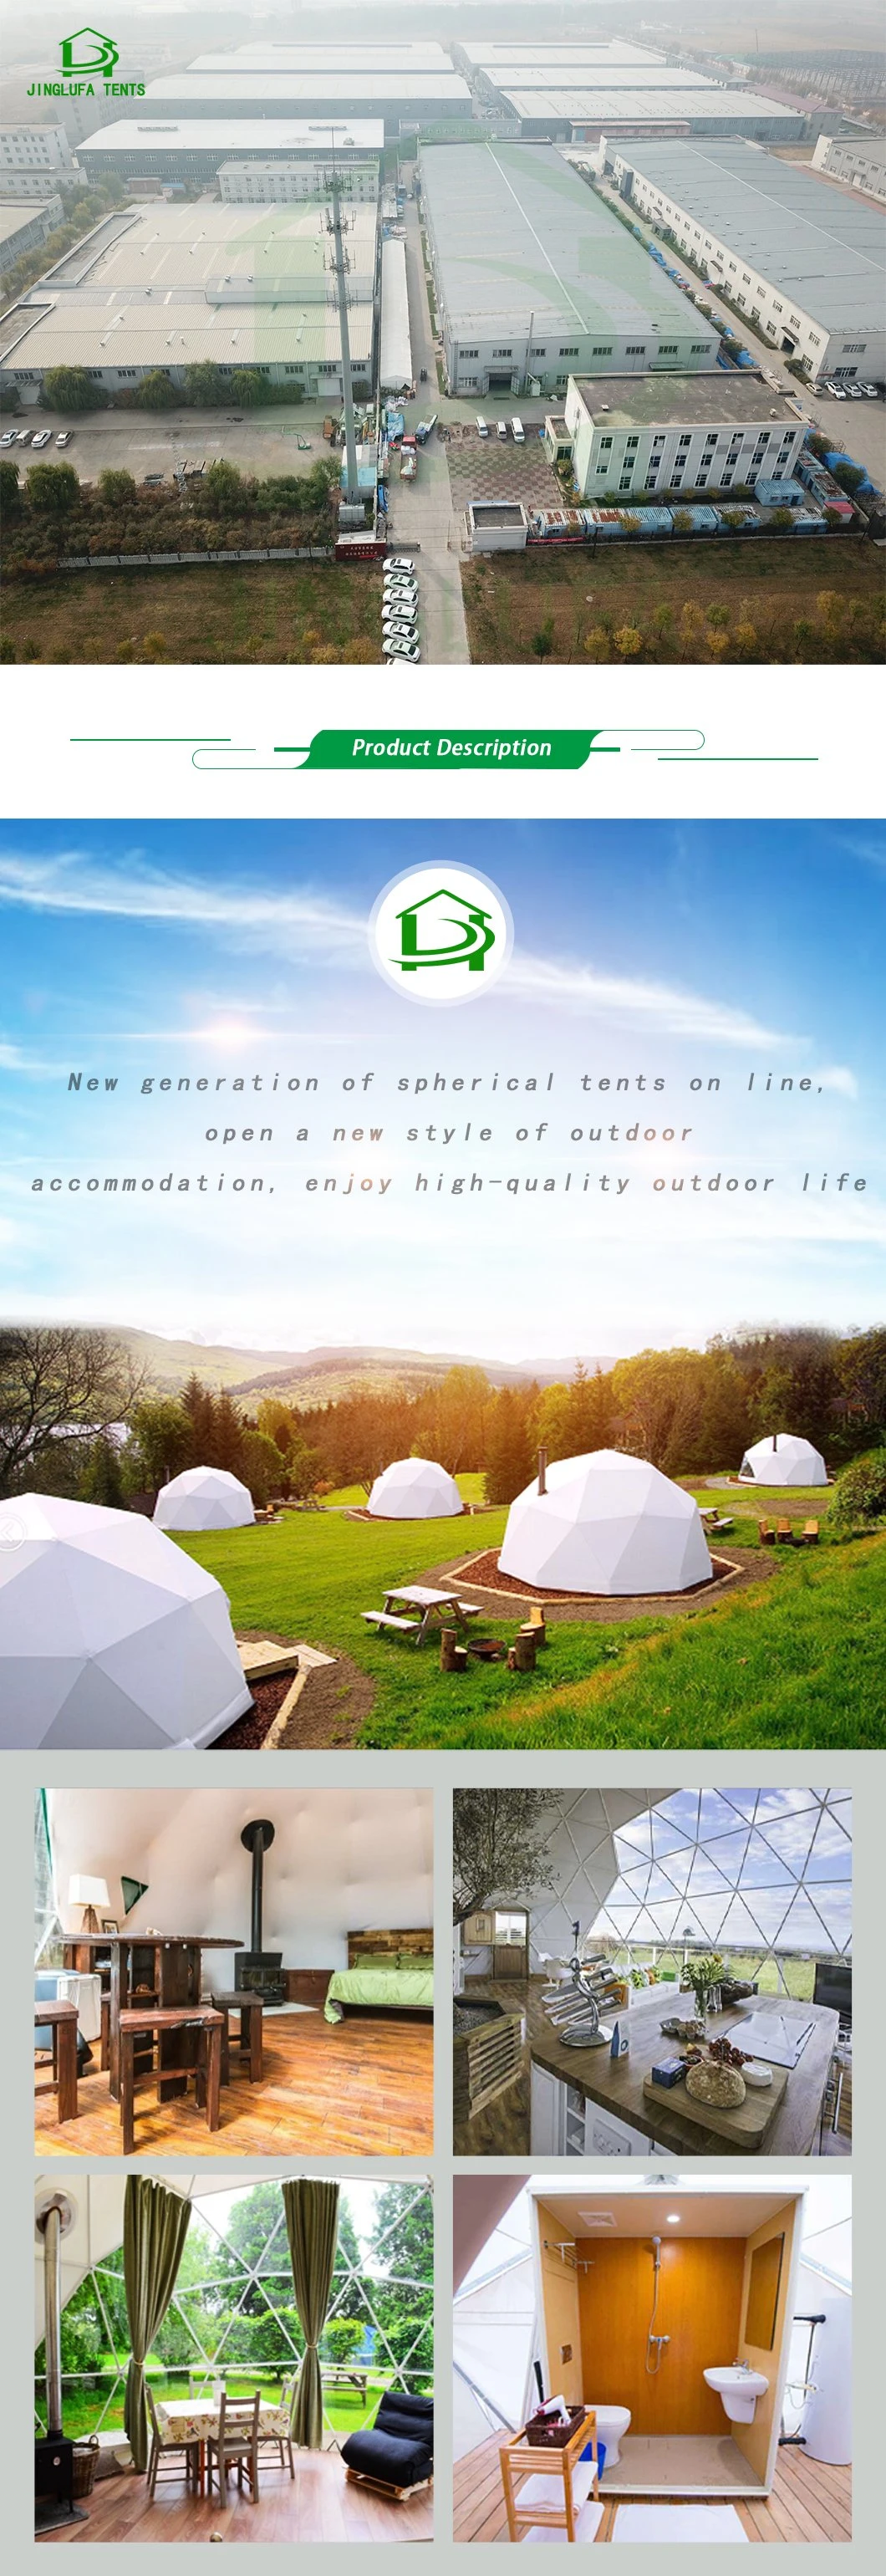 8m Air Conditioned Summer PVC Sphere Glamping Tent in Florida